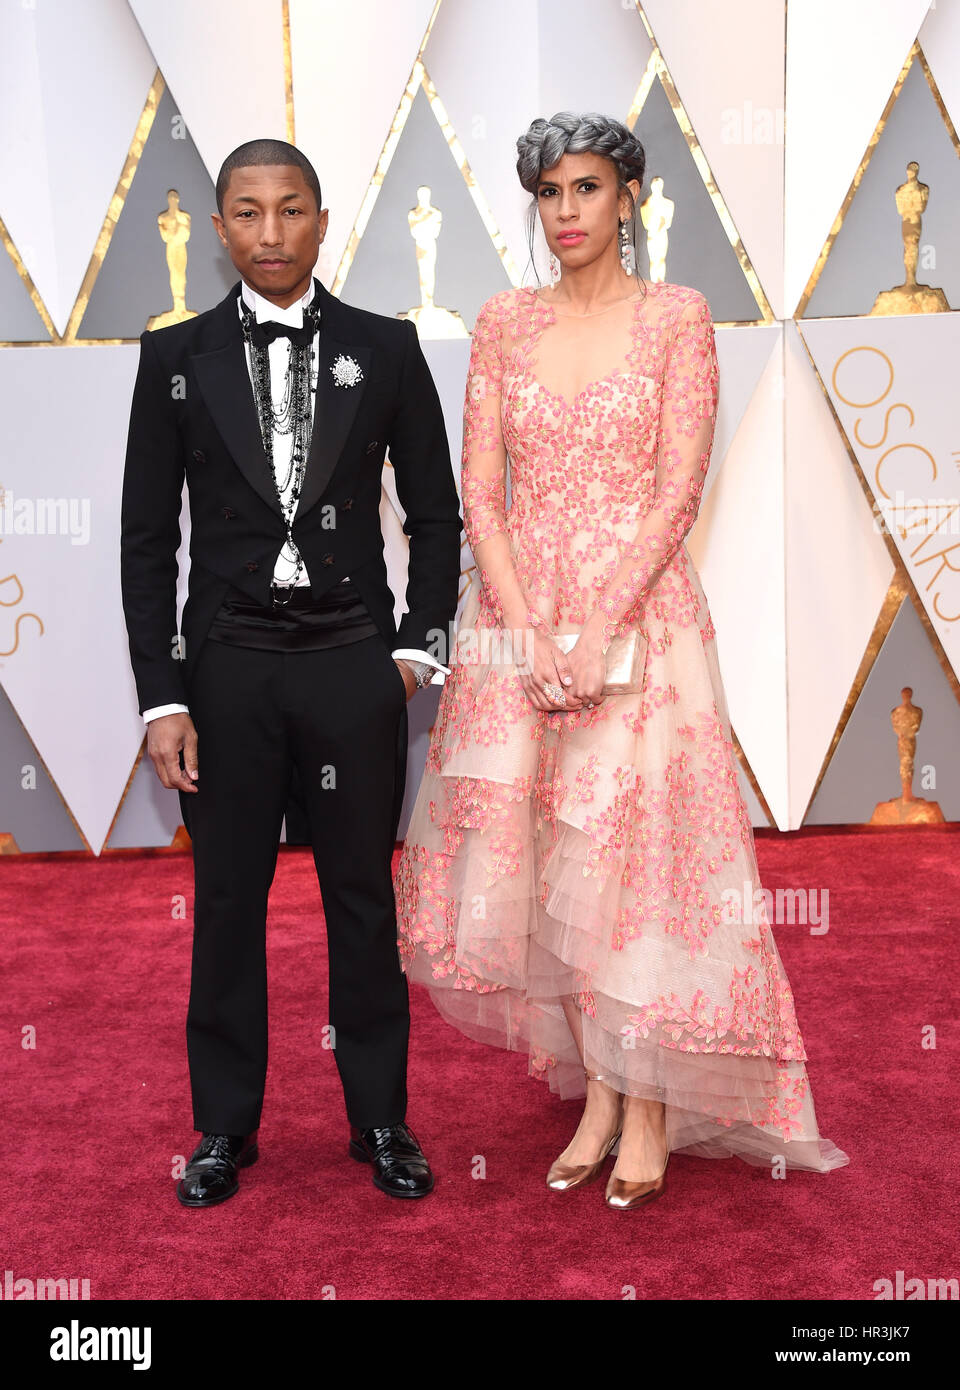 Hollywood, California, USA. 26th Feb, 2017. PHARRELL WILLIAMS and MIMI VALDES during red carpet arrivals for the 89th Academy Awards ceremony. Credit: Lisa O'Connor/ZUMA Wire/Alamy Live News Stock Photo